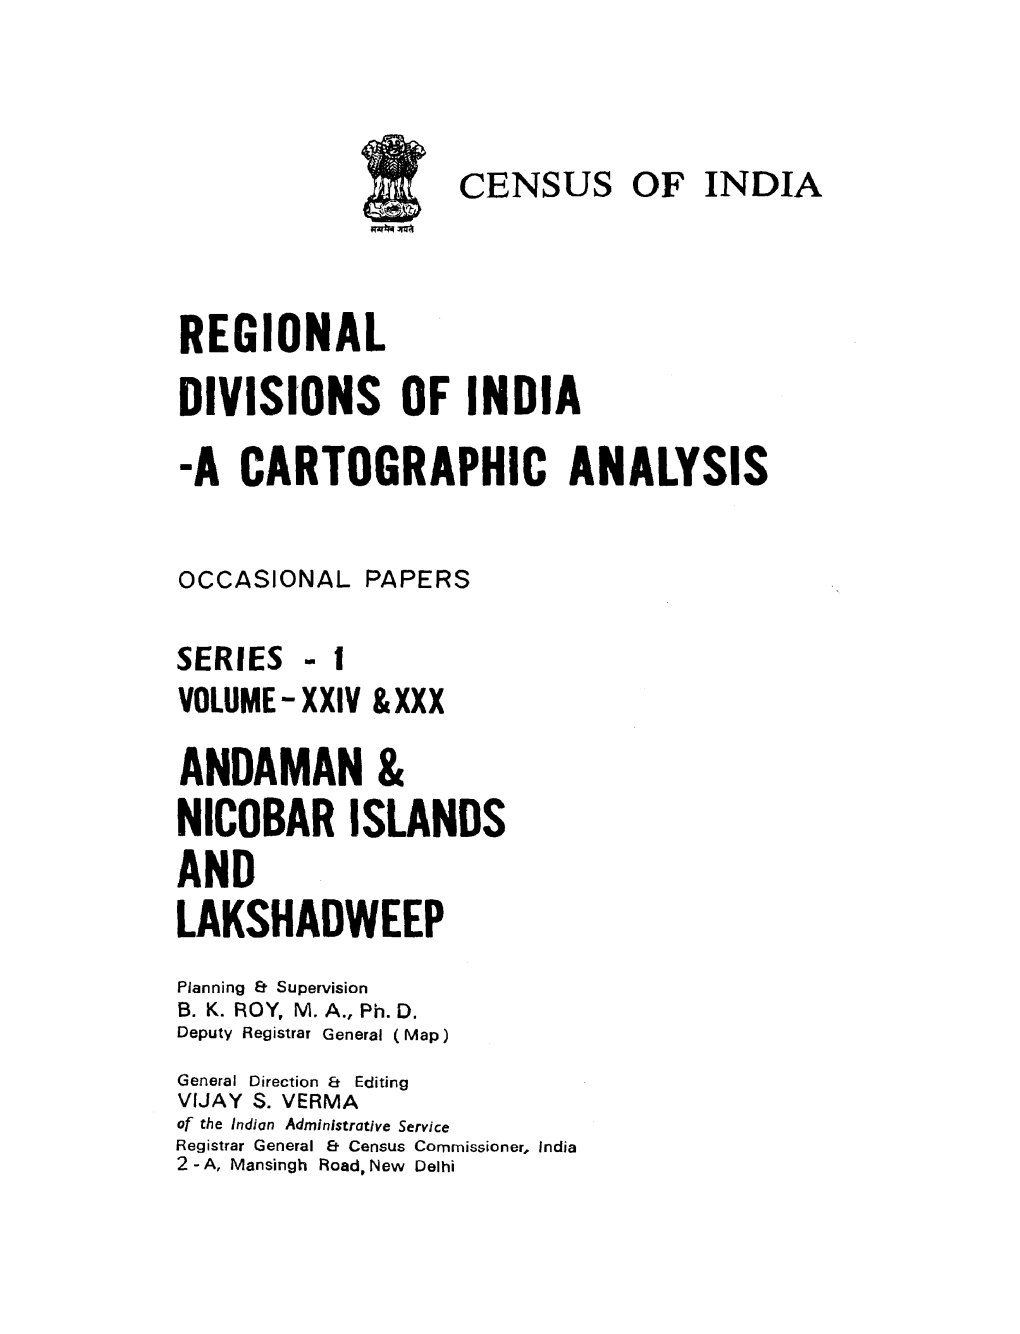 Regional Divisions of India a Cartographic Analysis, Vol-XXIV